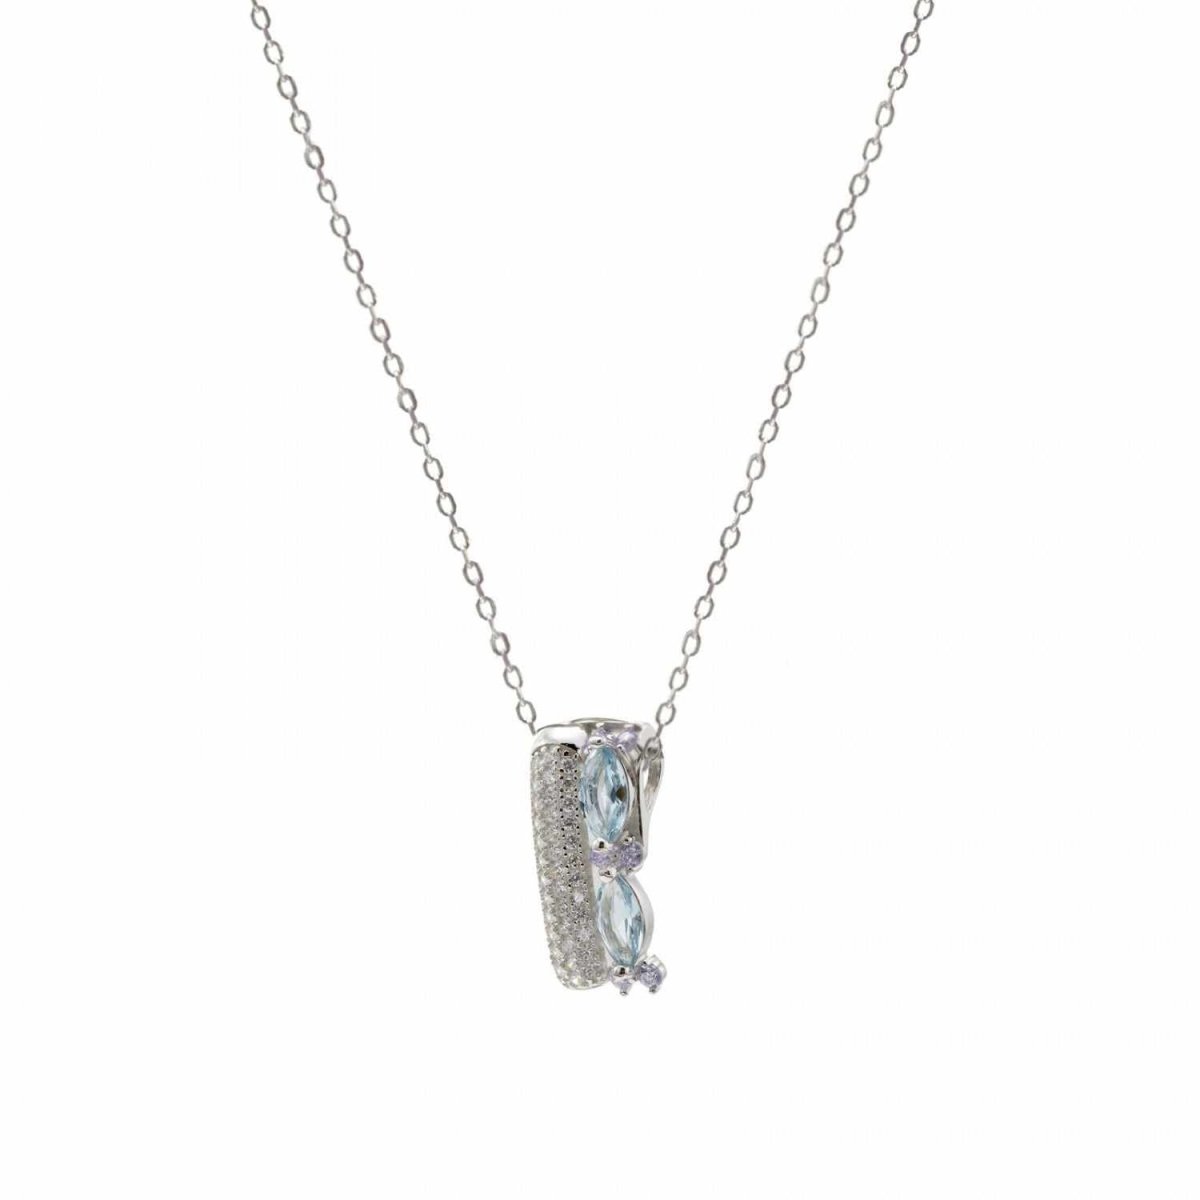 Necklace - Necklaces - Necklaces with stones in silver side design blue marquise-cut zirconia stones